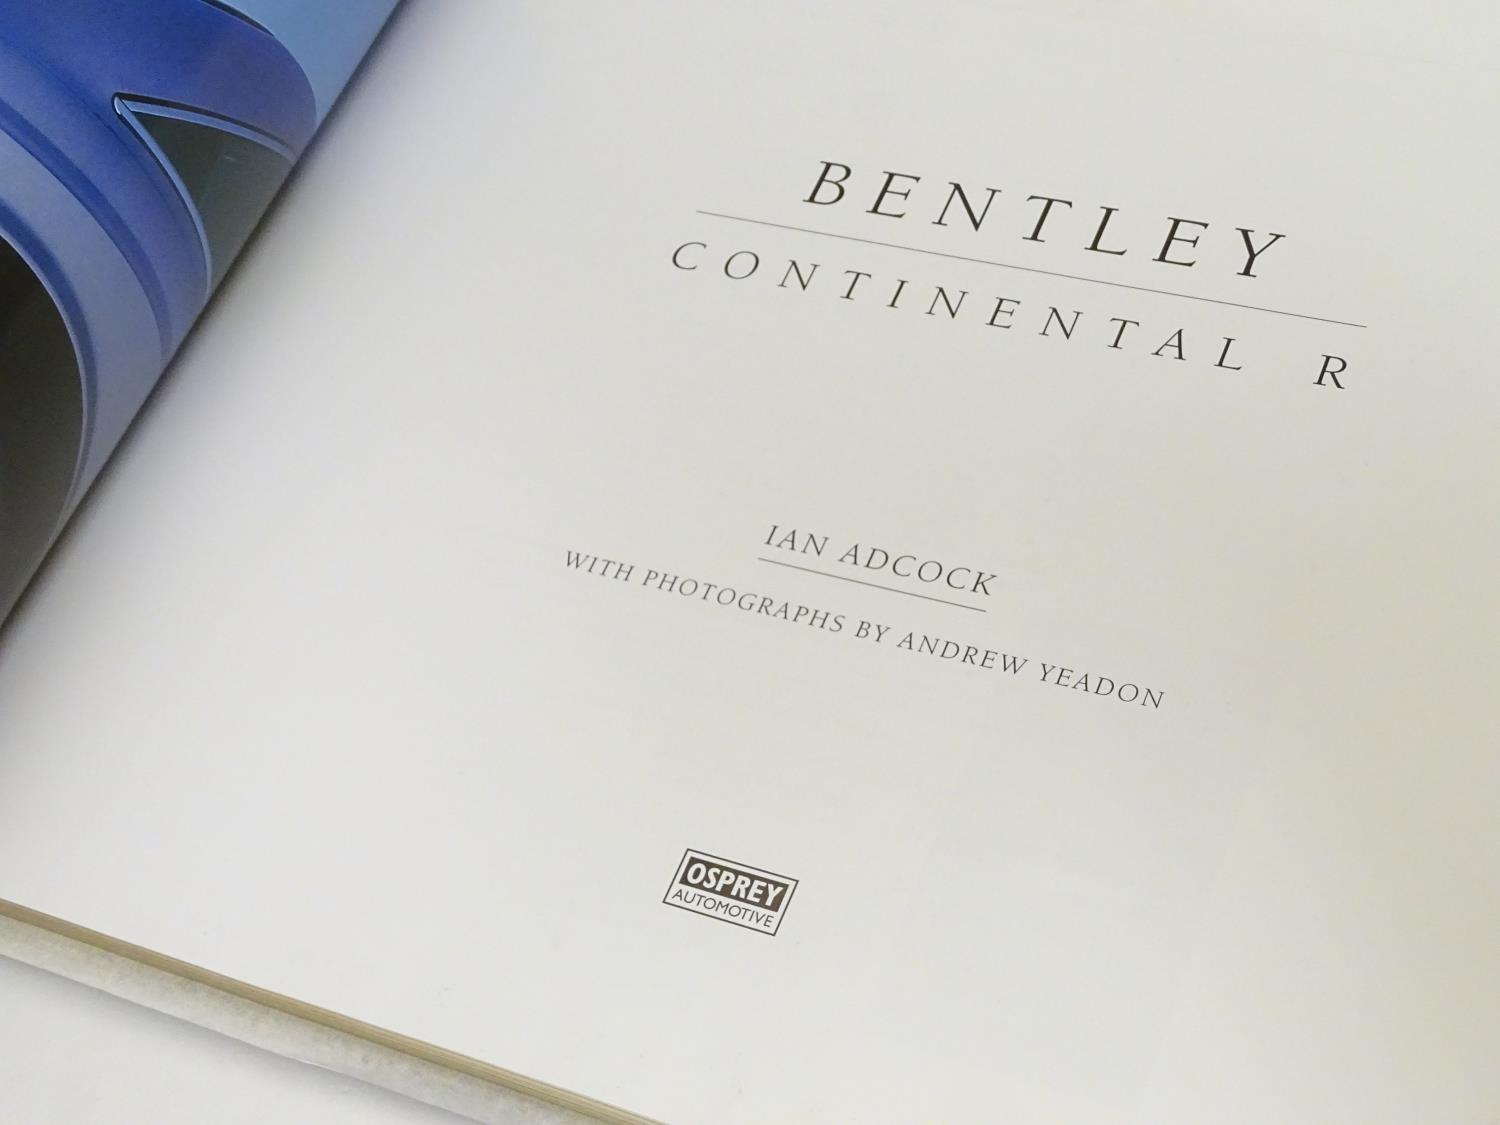 Book : Bentley Continental R, by Ian Adcock, pub. Osprey Automotive 1992 First edition, bound in - Image 4 of 9